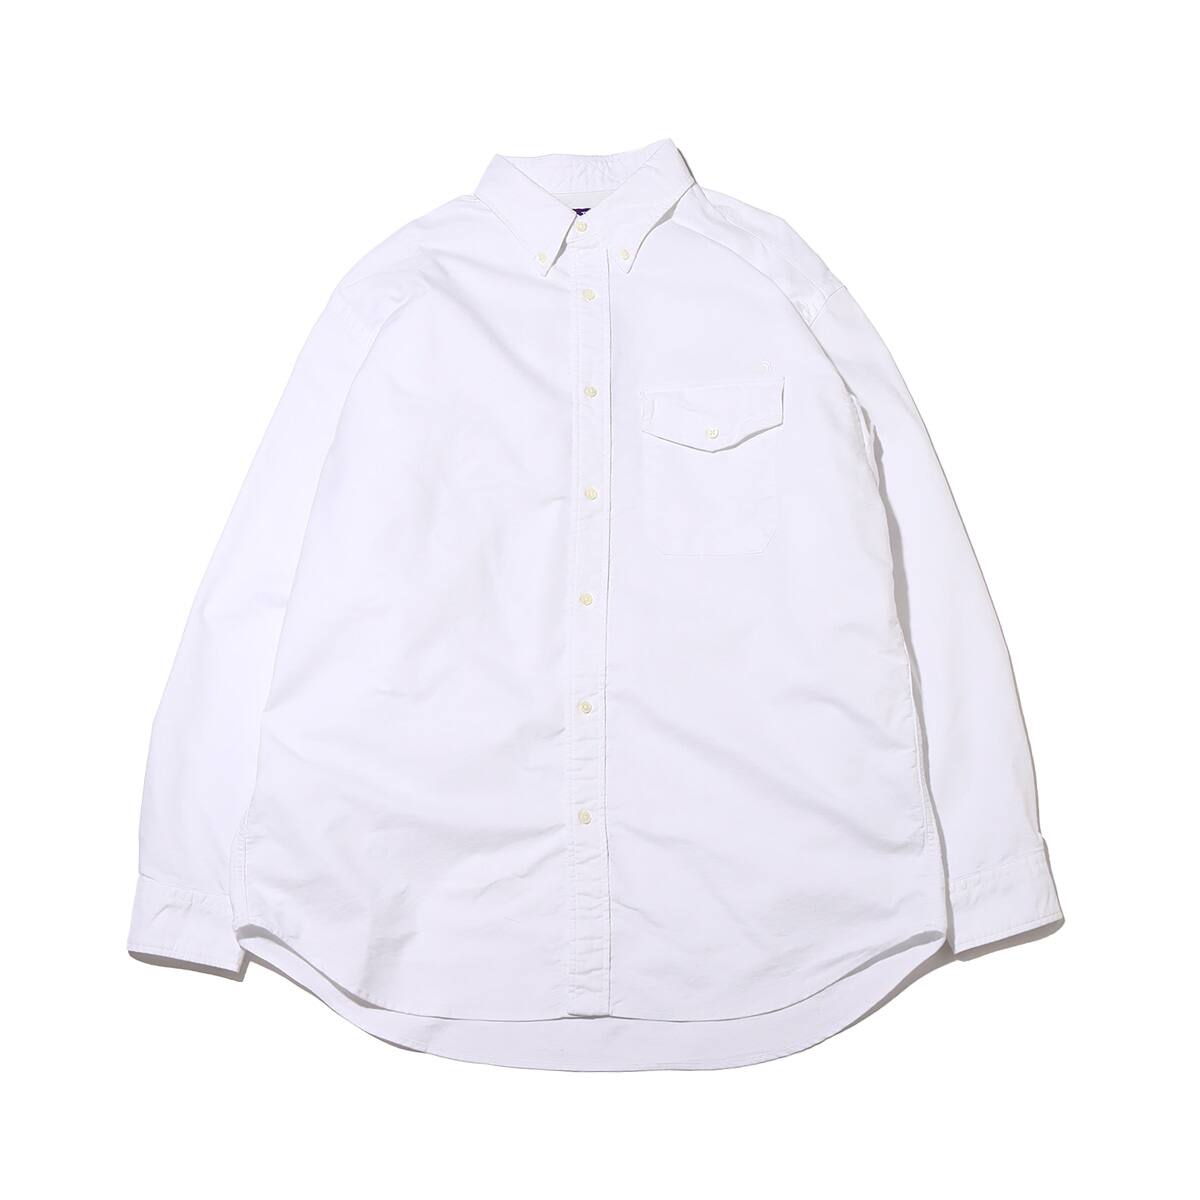 THE NORTH FACE PURPLE LABEL Cotton Polyester OX B.D. Shirt White 